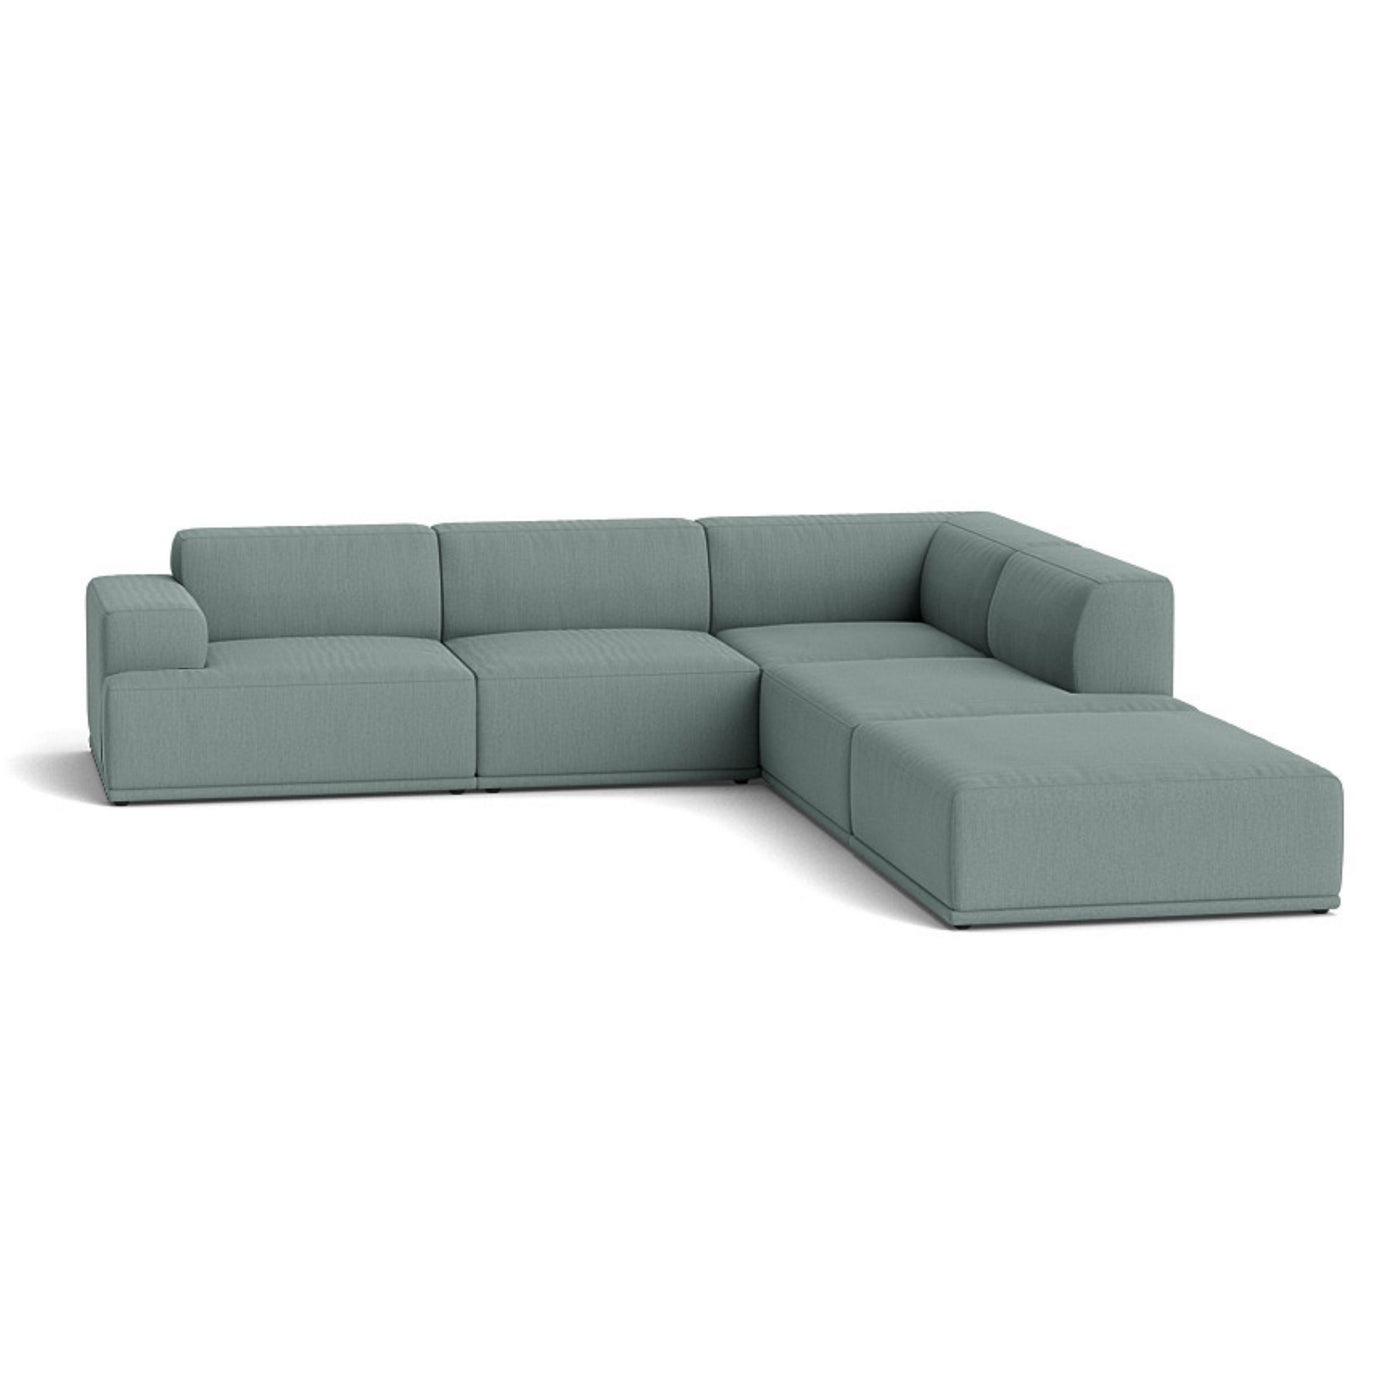 Muuto Connect Soft Modular Corner Sofa, configuration 2. Made-to-order from someday designs. #colour_re-wool-868